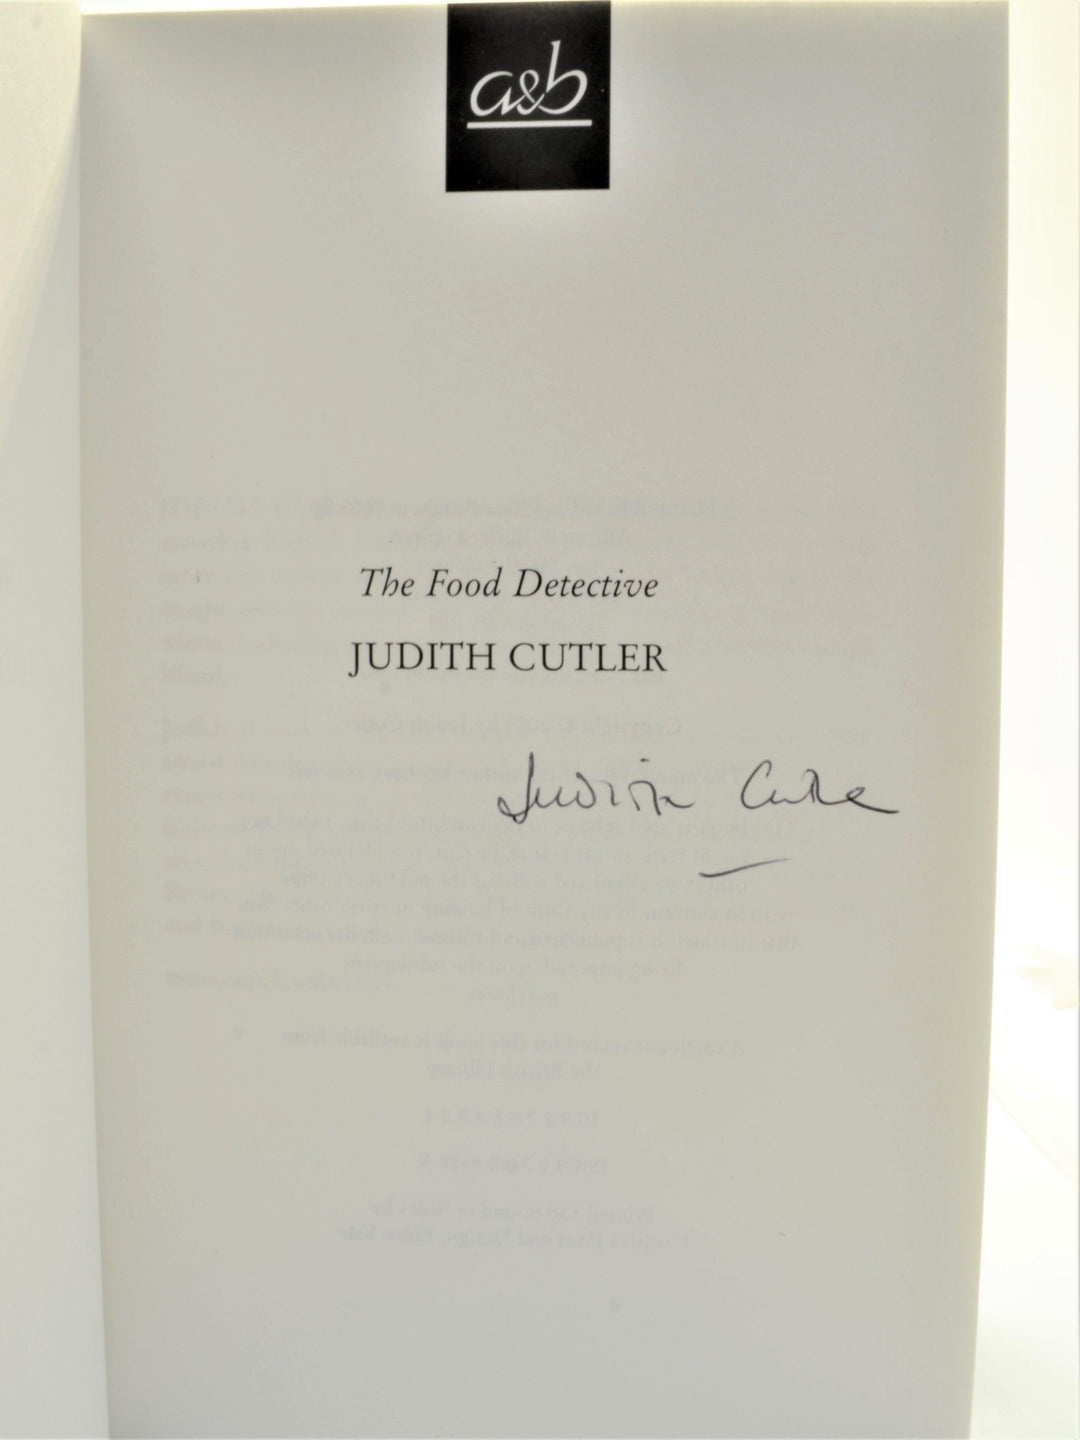 Cutler, Judith - The Food Detective - SIGNED | image5